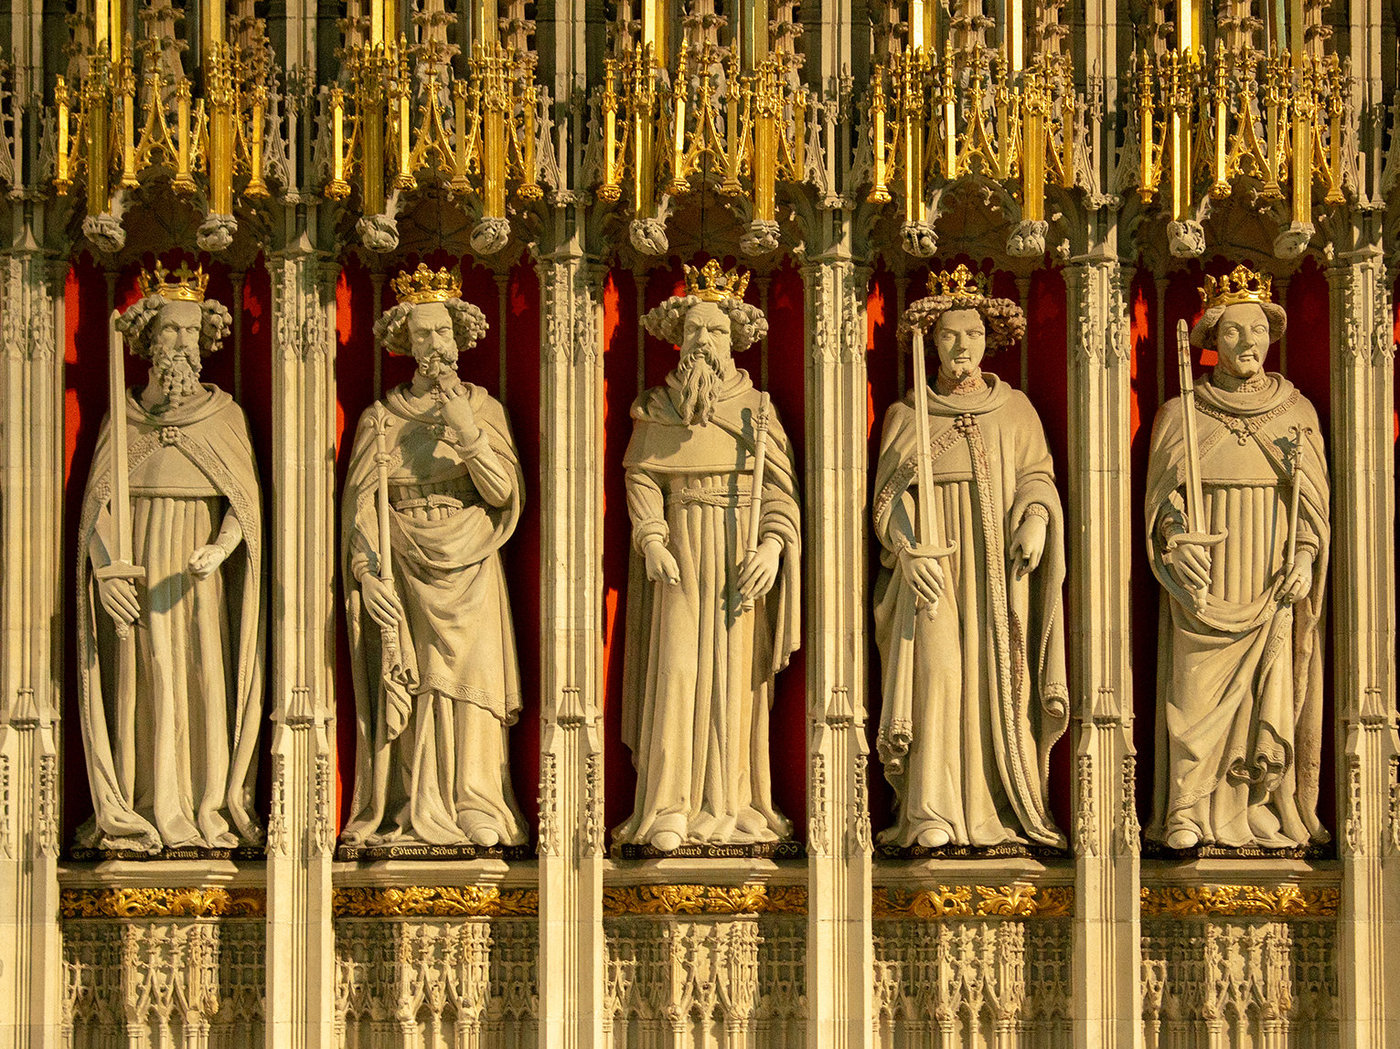 Fifteenth-century Kings‘ Screen in York Minster, made up of numerous statues of English kings, from William the Conqueror to Henry VI. By Peter K. Burian [CC BY-SA 4.0]